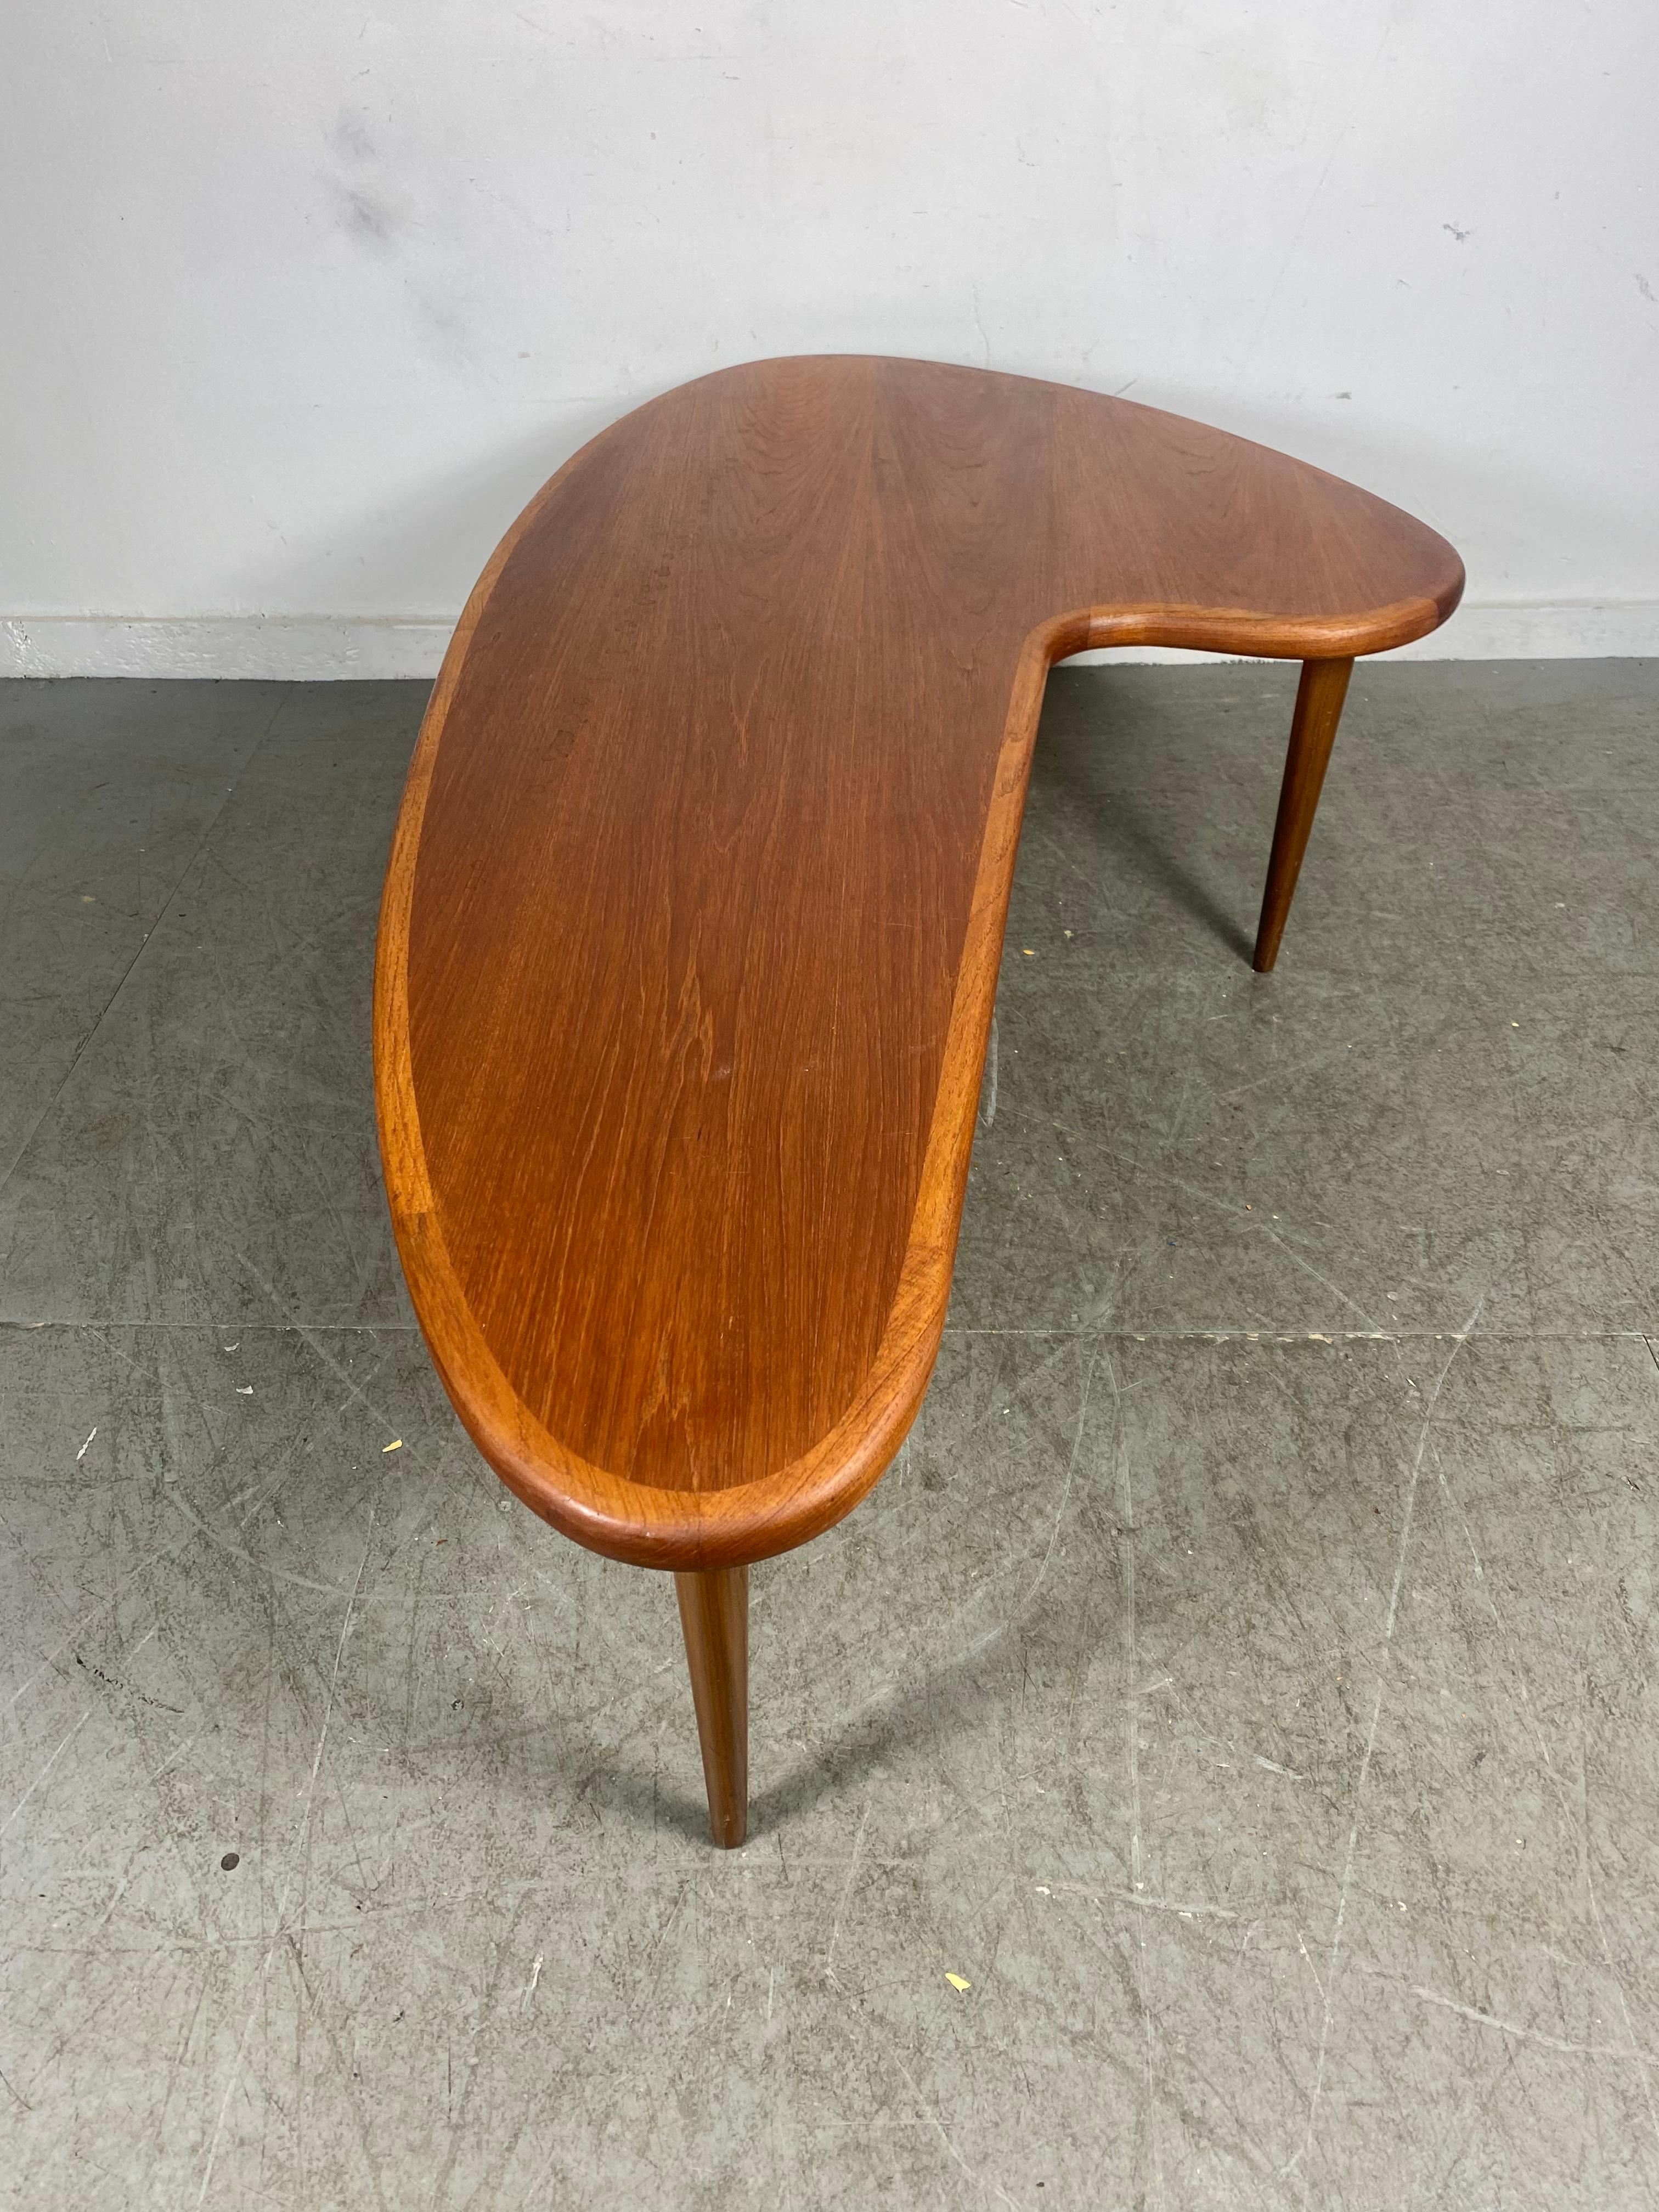 Classic Midcentury Walnut Boomerang Coffee / Cocktail Table with Drawer In Good Condition For Sale In Buffalo, NY